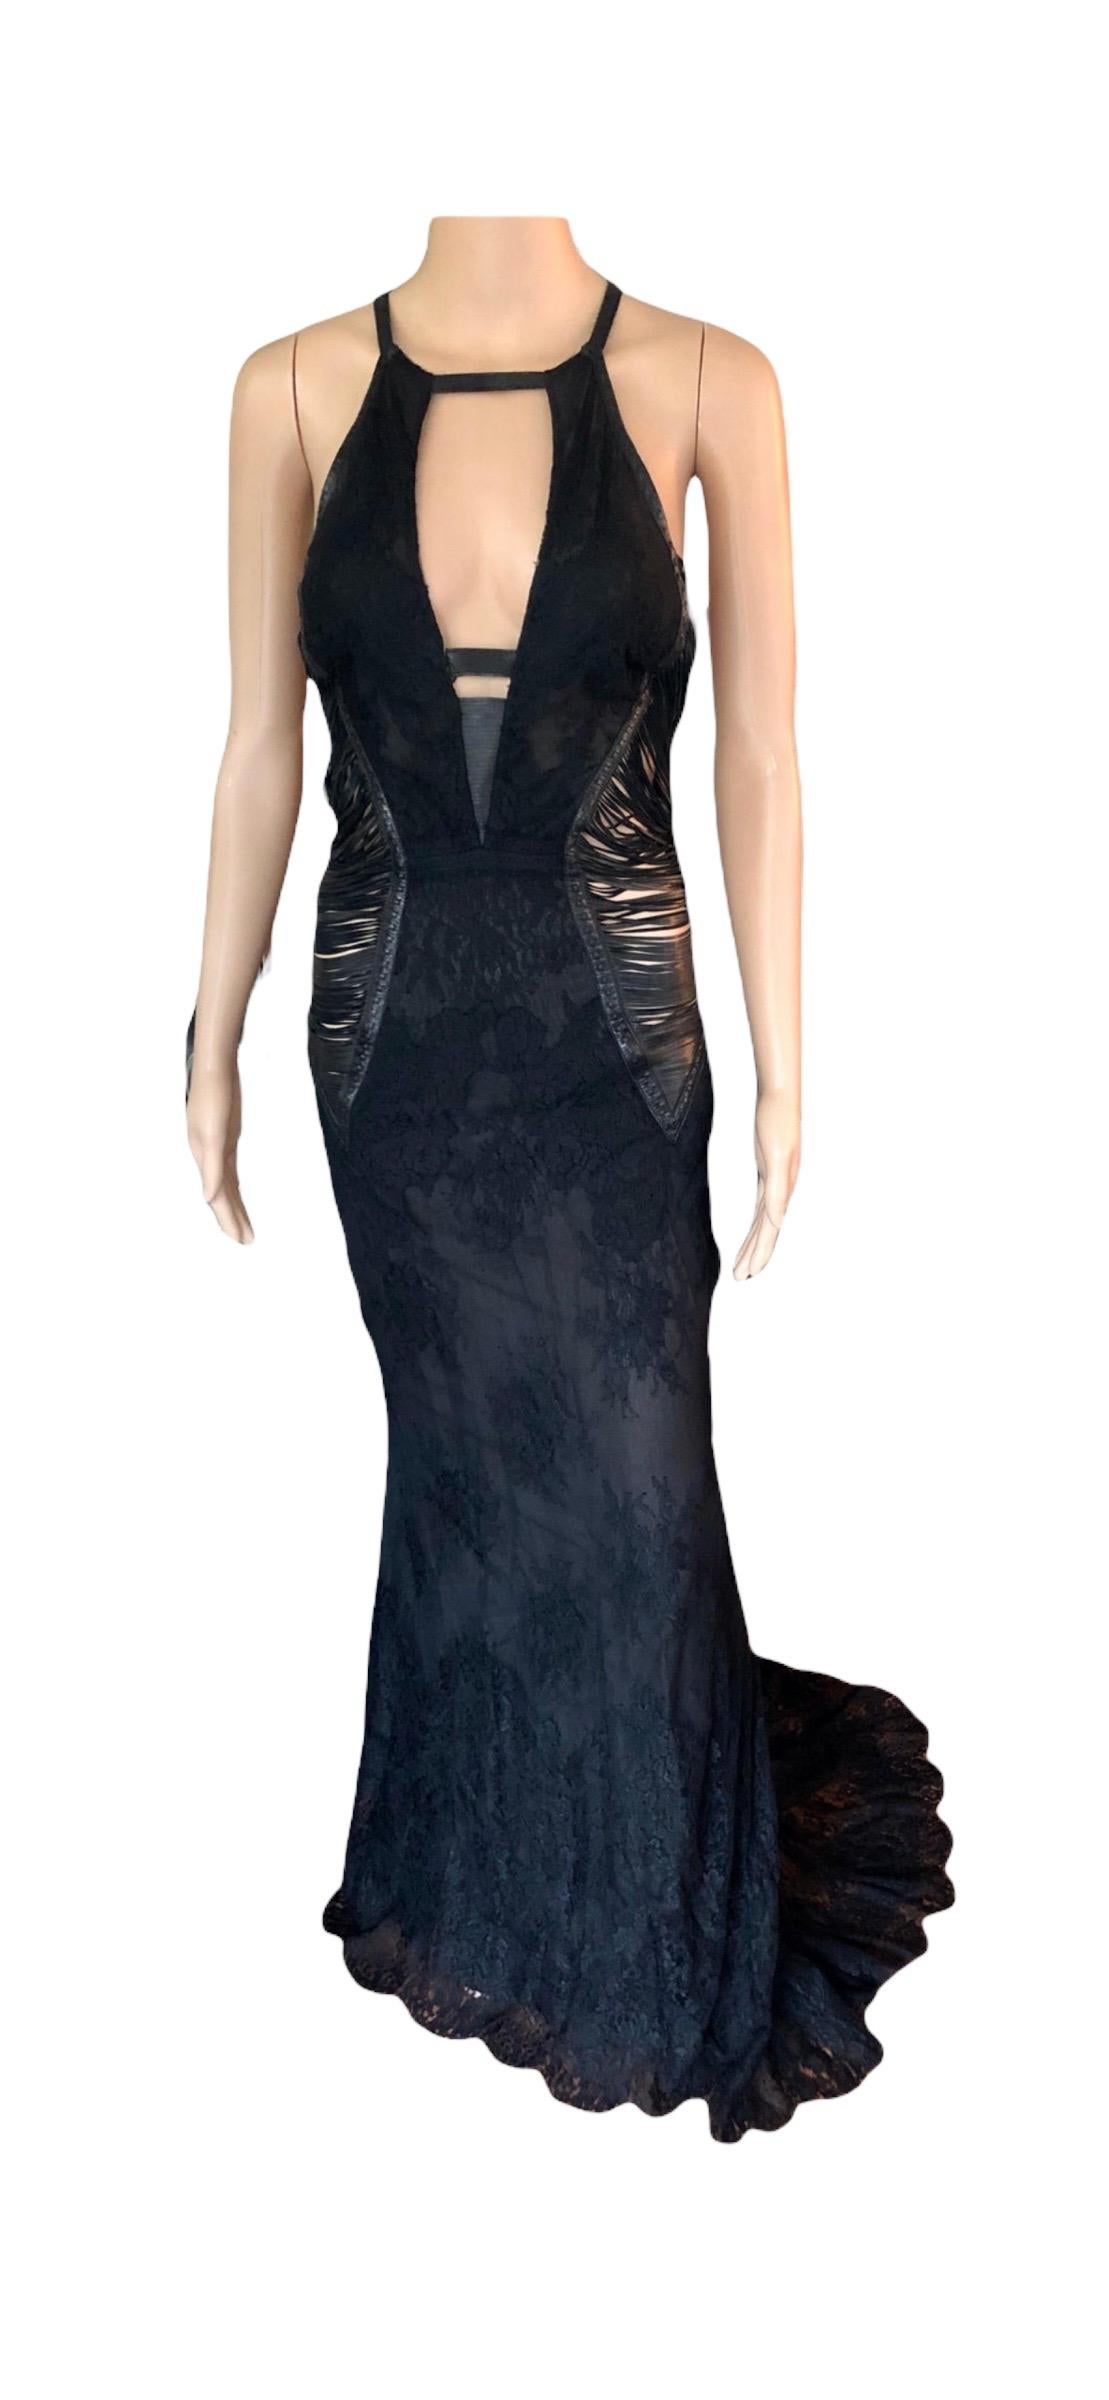 Roberto Cavalli S/S 2013 Leather Cutout Open Back Black Evening Dress Gown For Sale 13